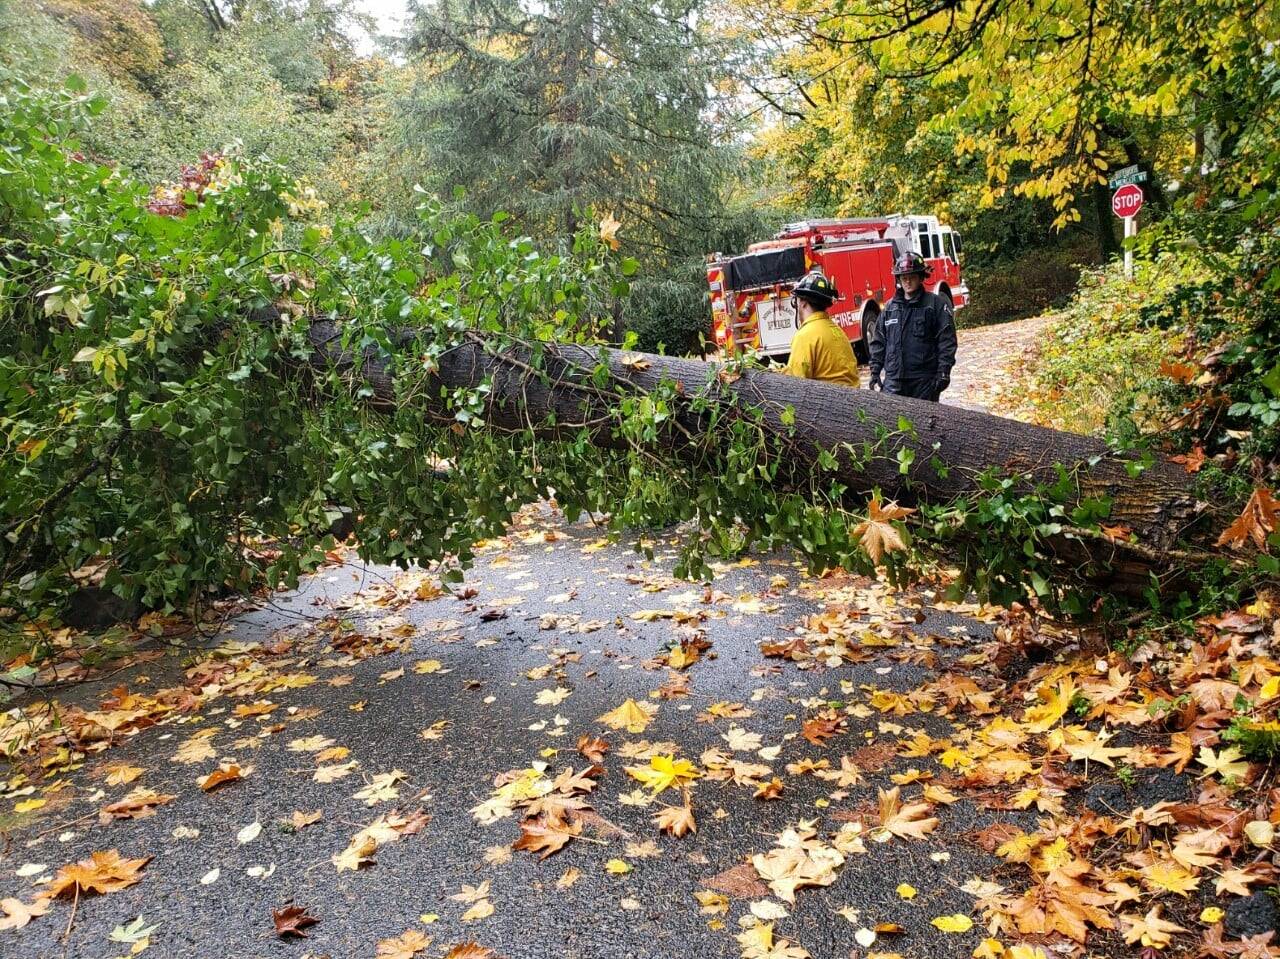 Stormy weather downed many Island trees over the weekend of Oct. 23-24. There were no injuries, according to the city. Photo courtesy of the Mercer Island Fire Department